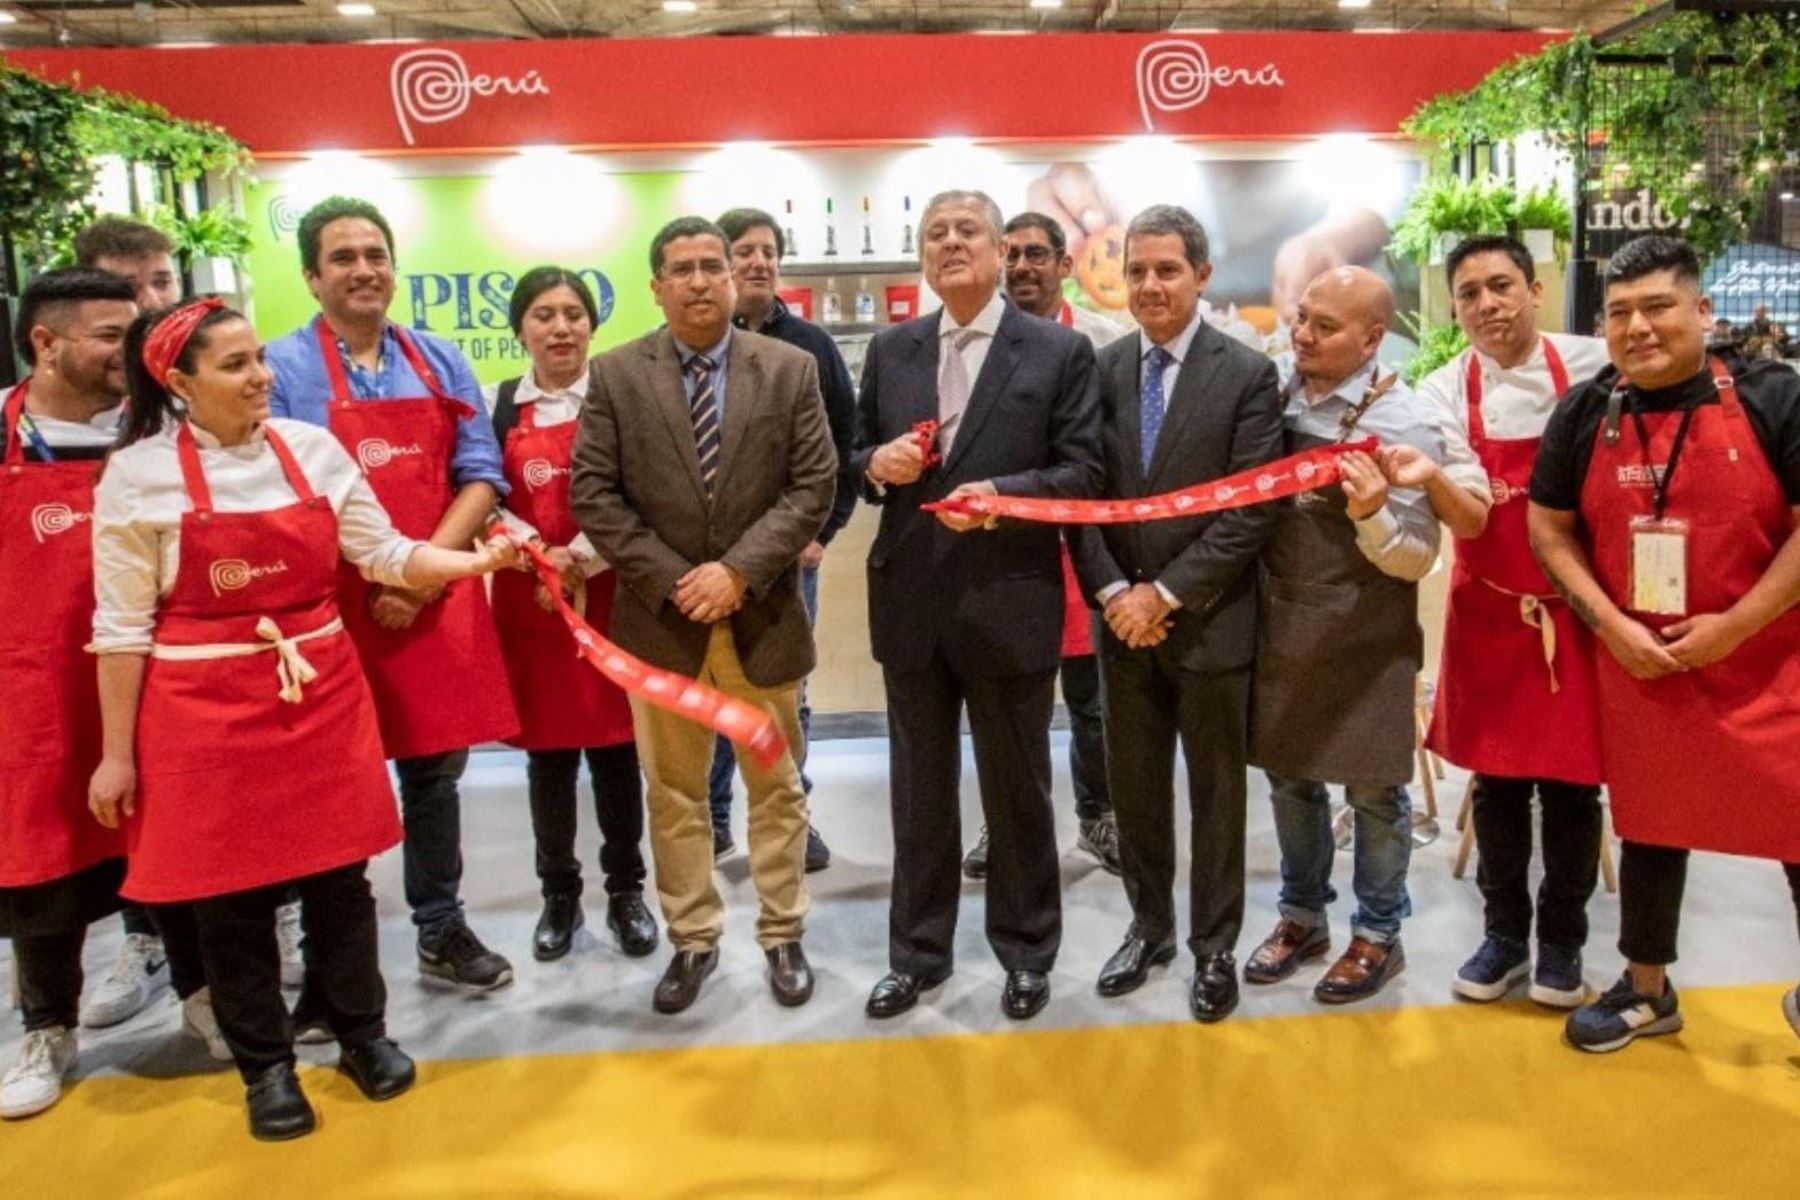 Spain’s gastronomic fair: Peru showcases best of its cuisine and export potential at Madrid Fusion